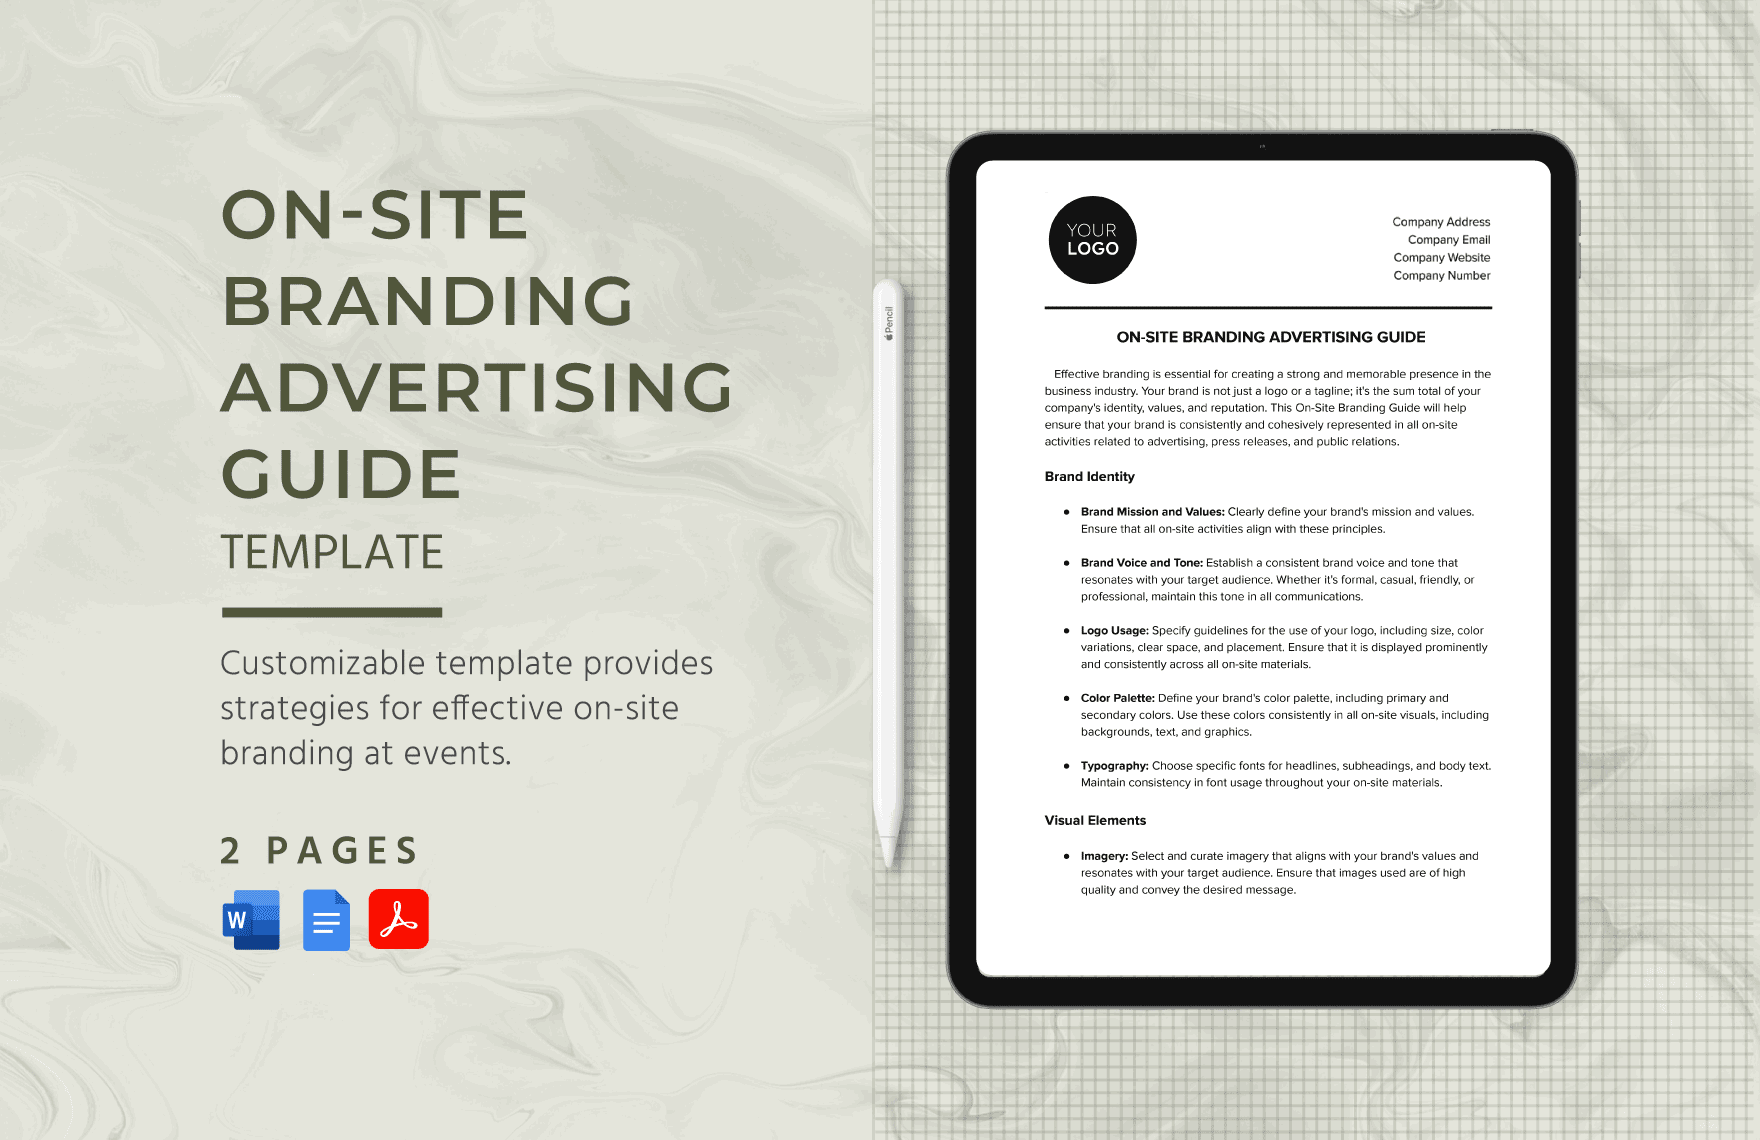 On-Site Branding Advertising Guide Template